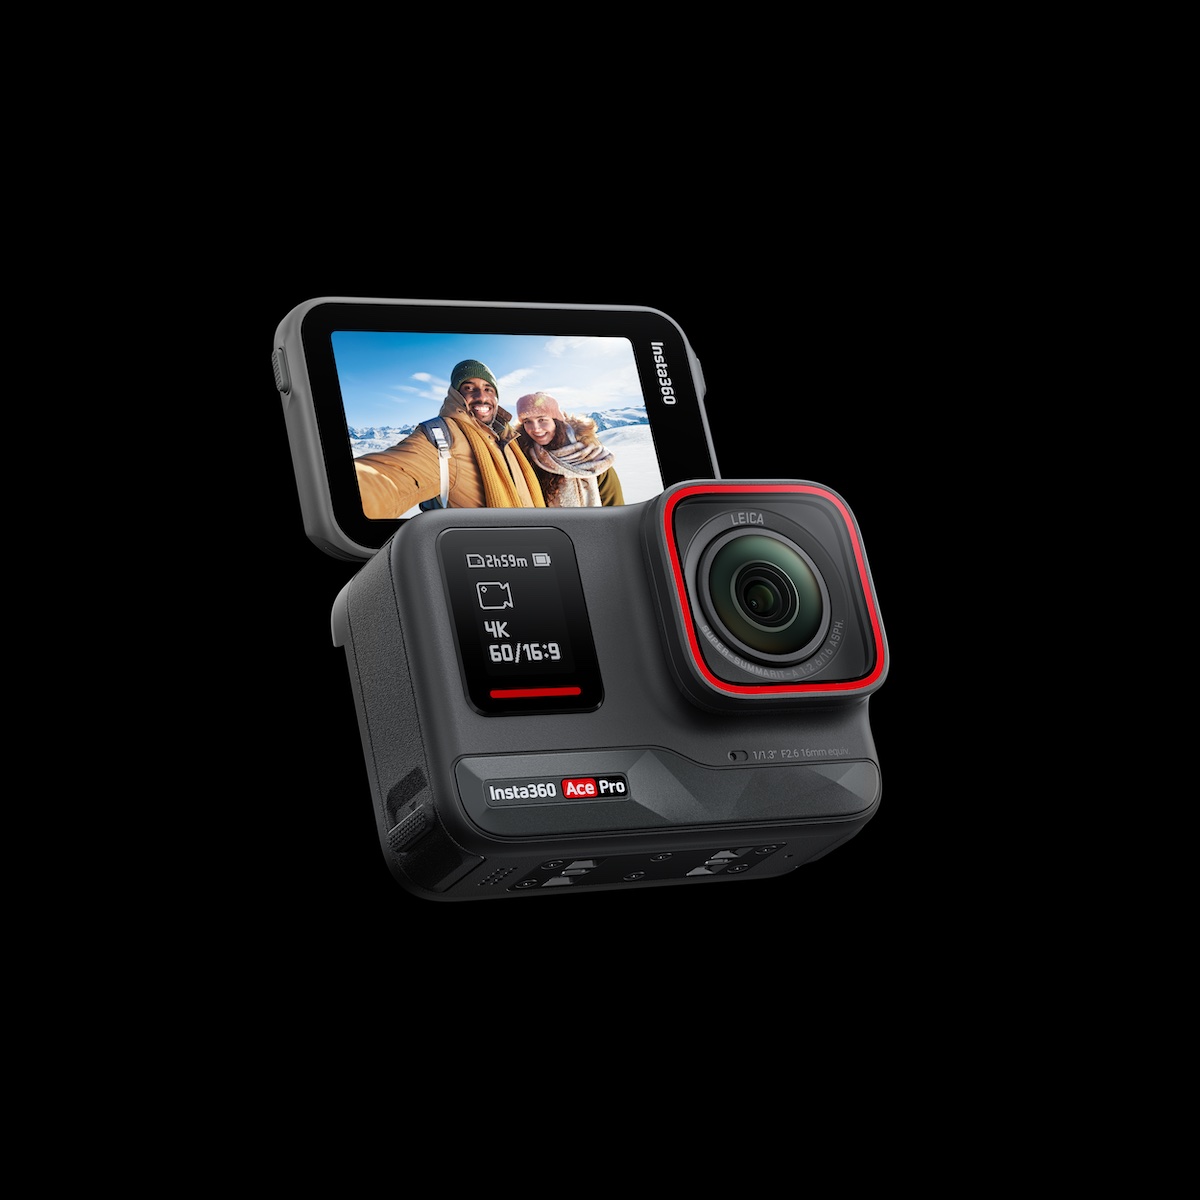 Insta360 Ace and Ace Pro action cameras officially announced - Photo Rumors